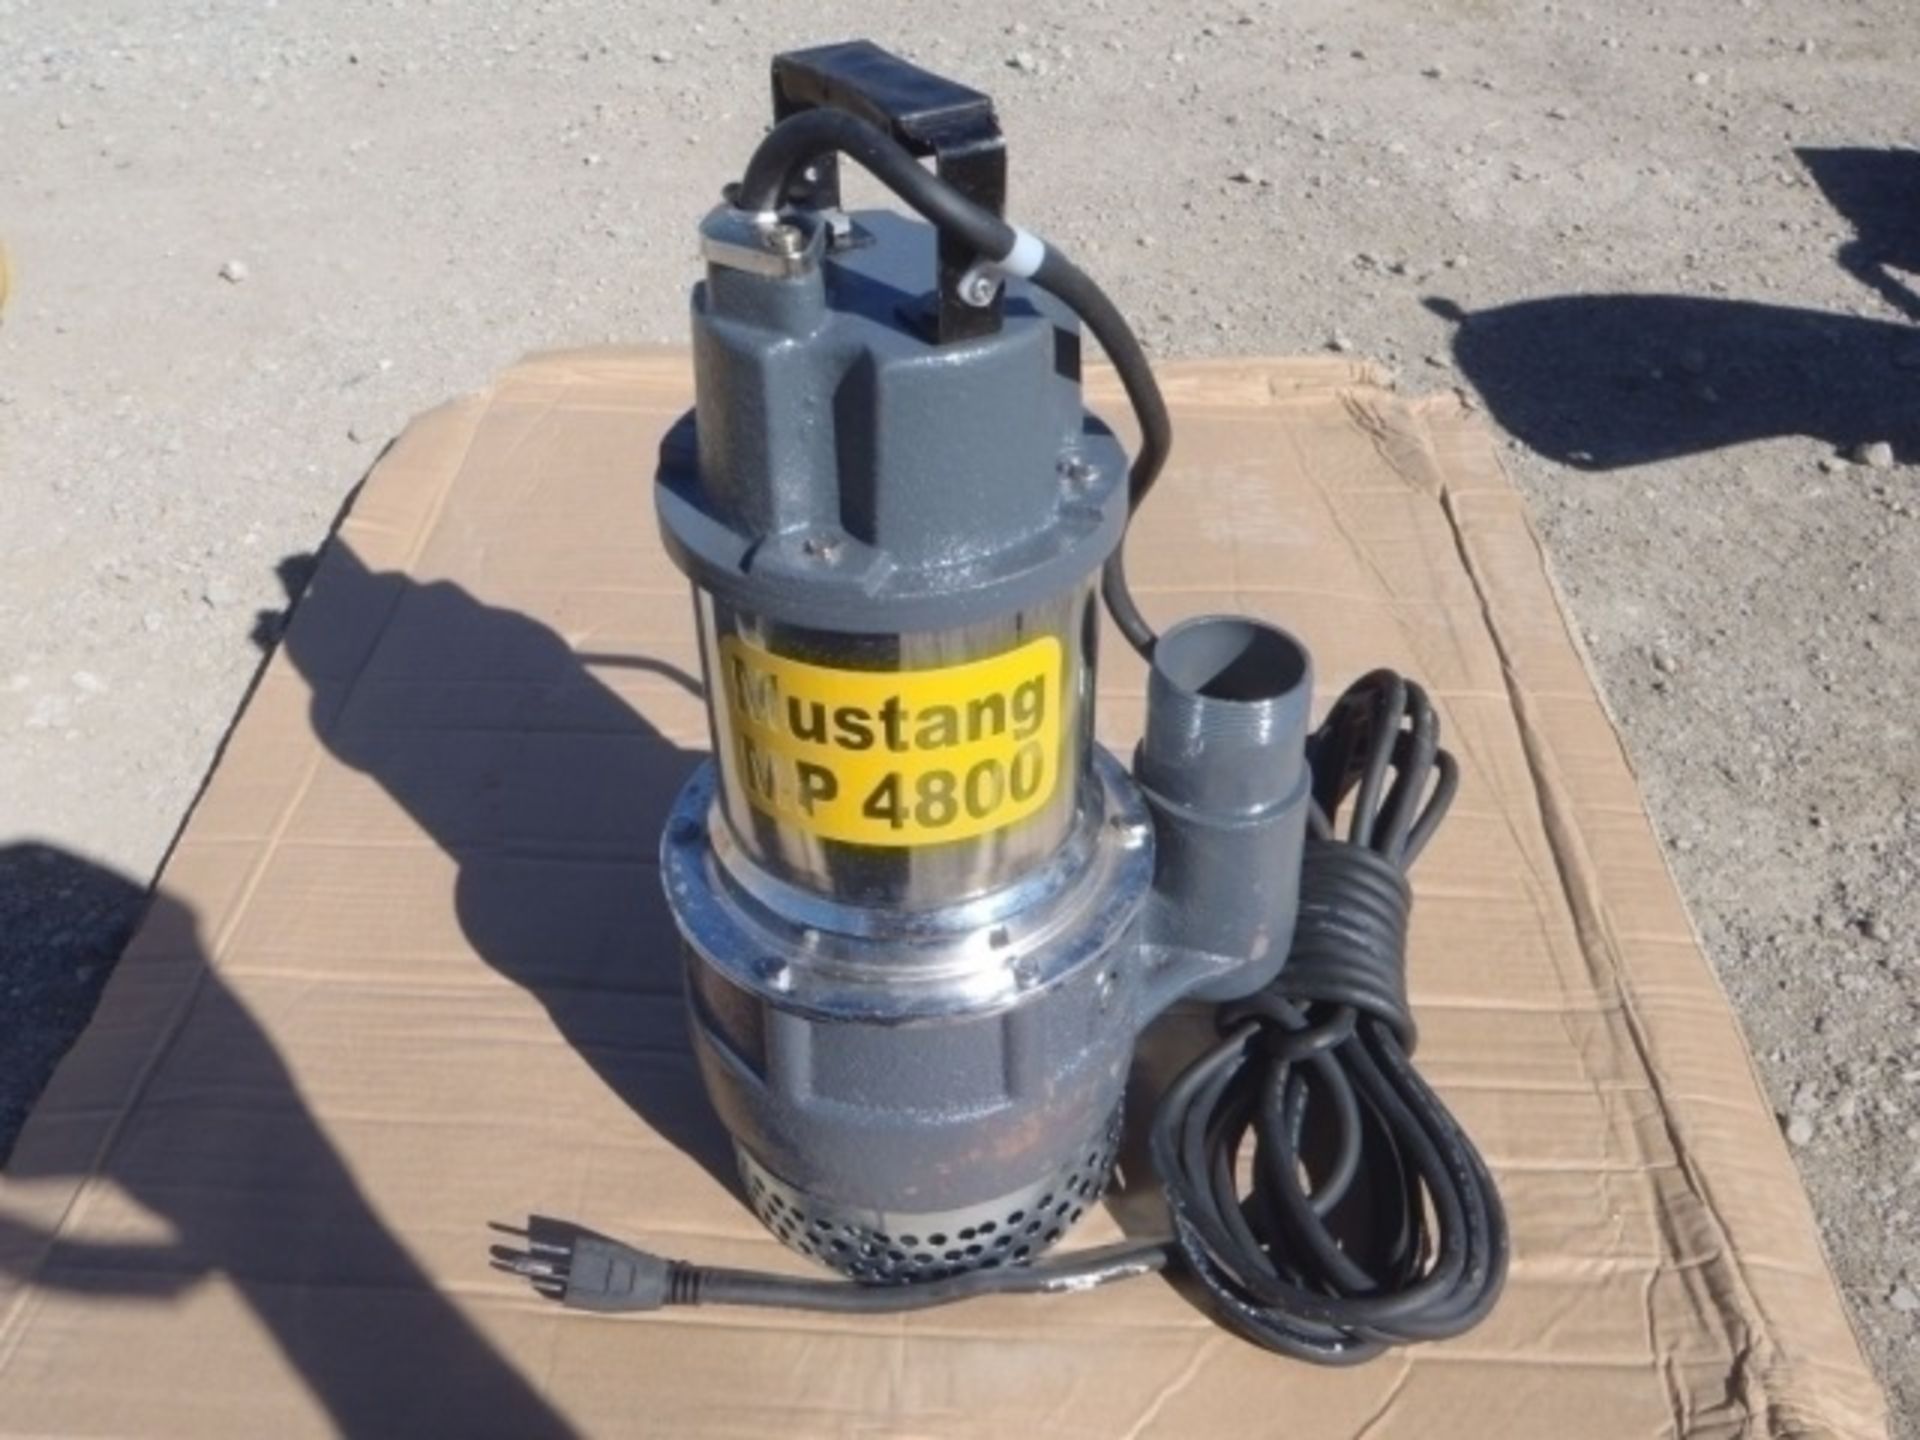 Unused Mustang MP4800 2" Submersible Pump, Electric - Image 2 of 4